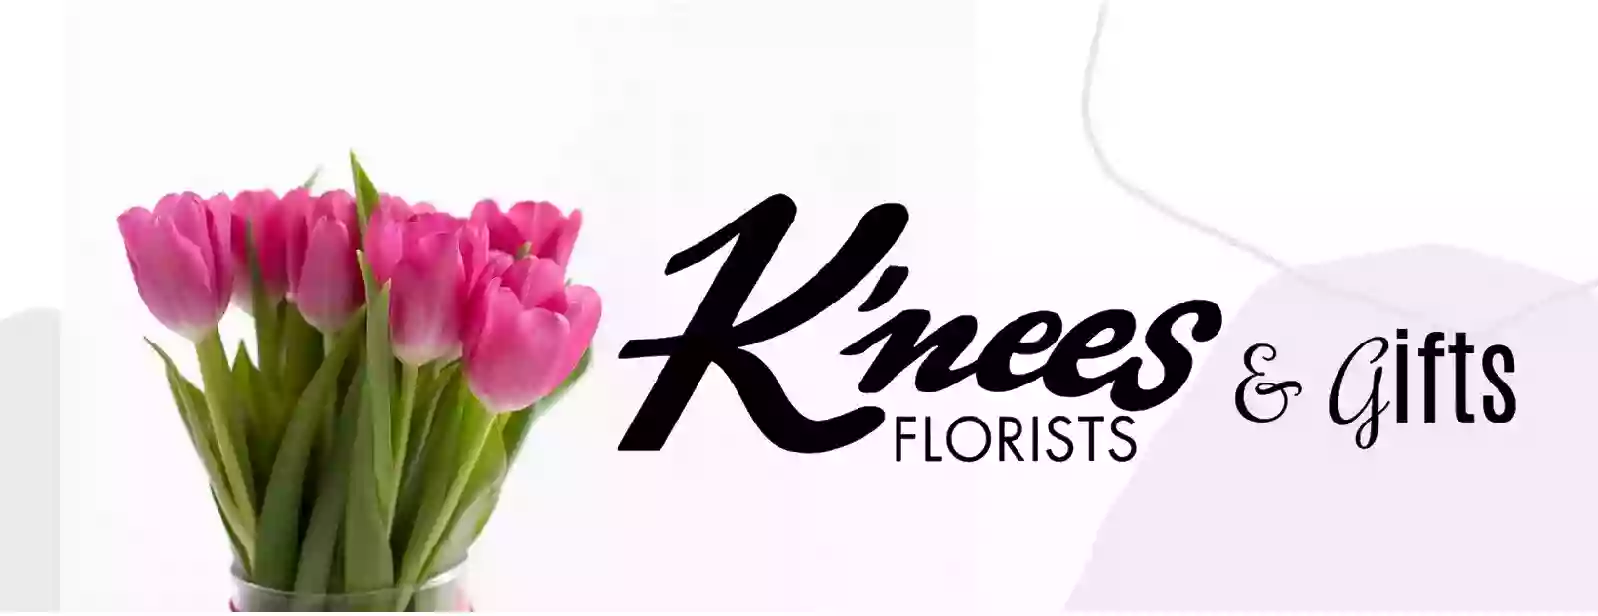 K'nees Florists & Gifts